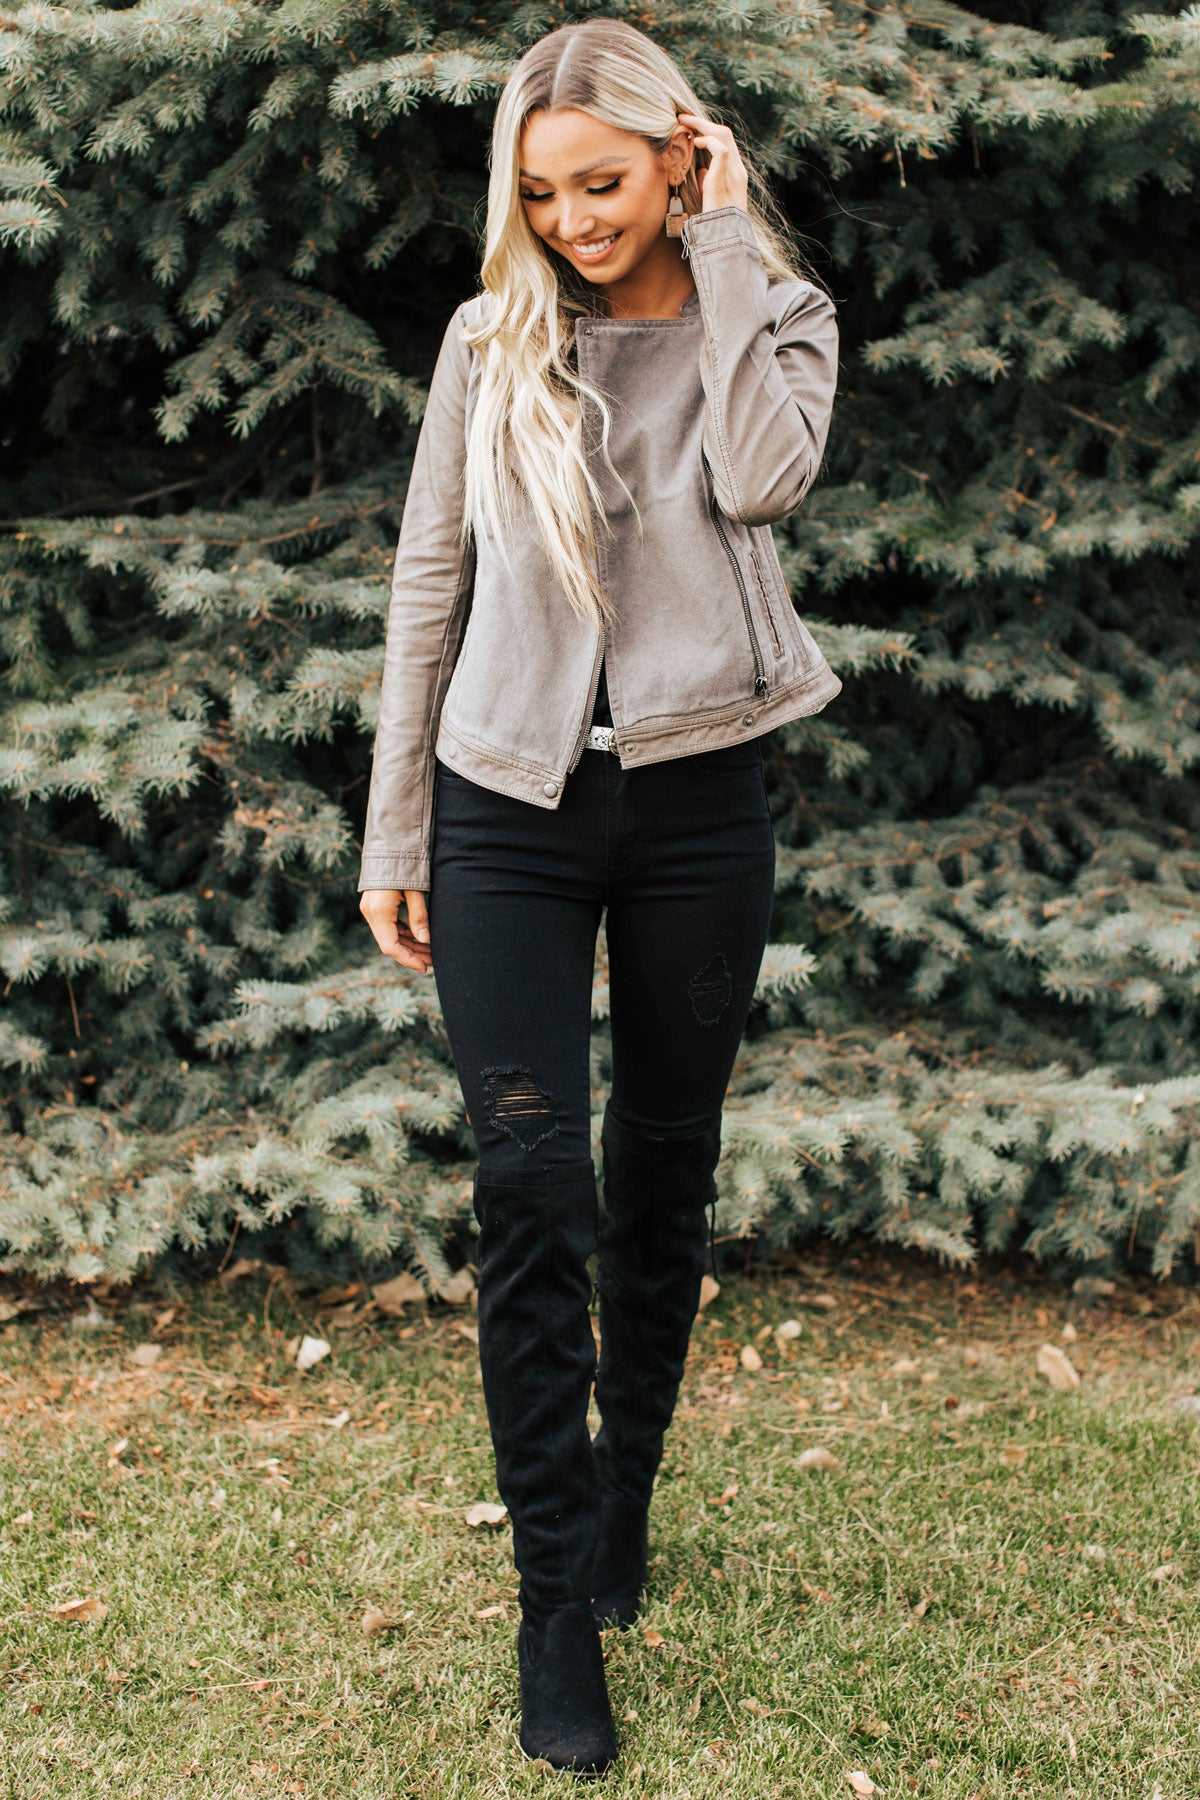 Women's Chic Leather Jacket for Fall